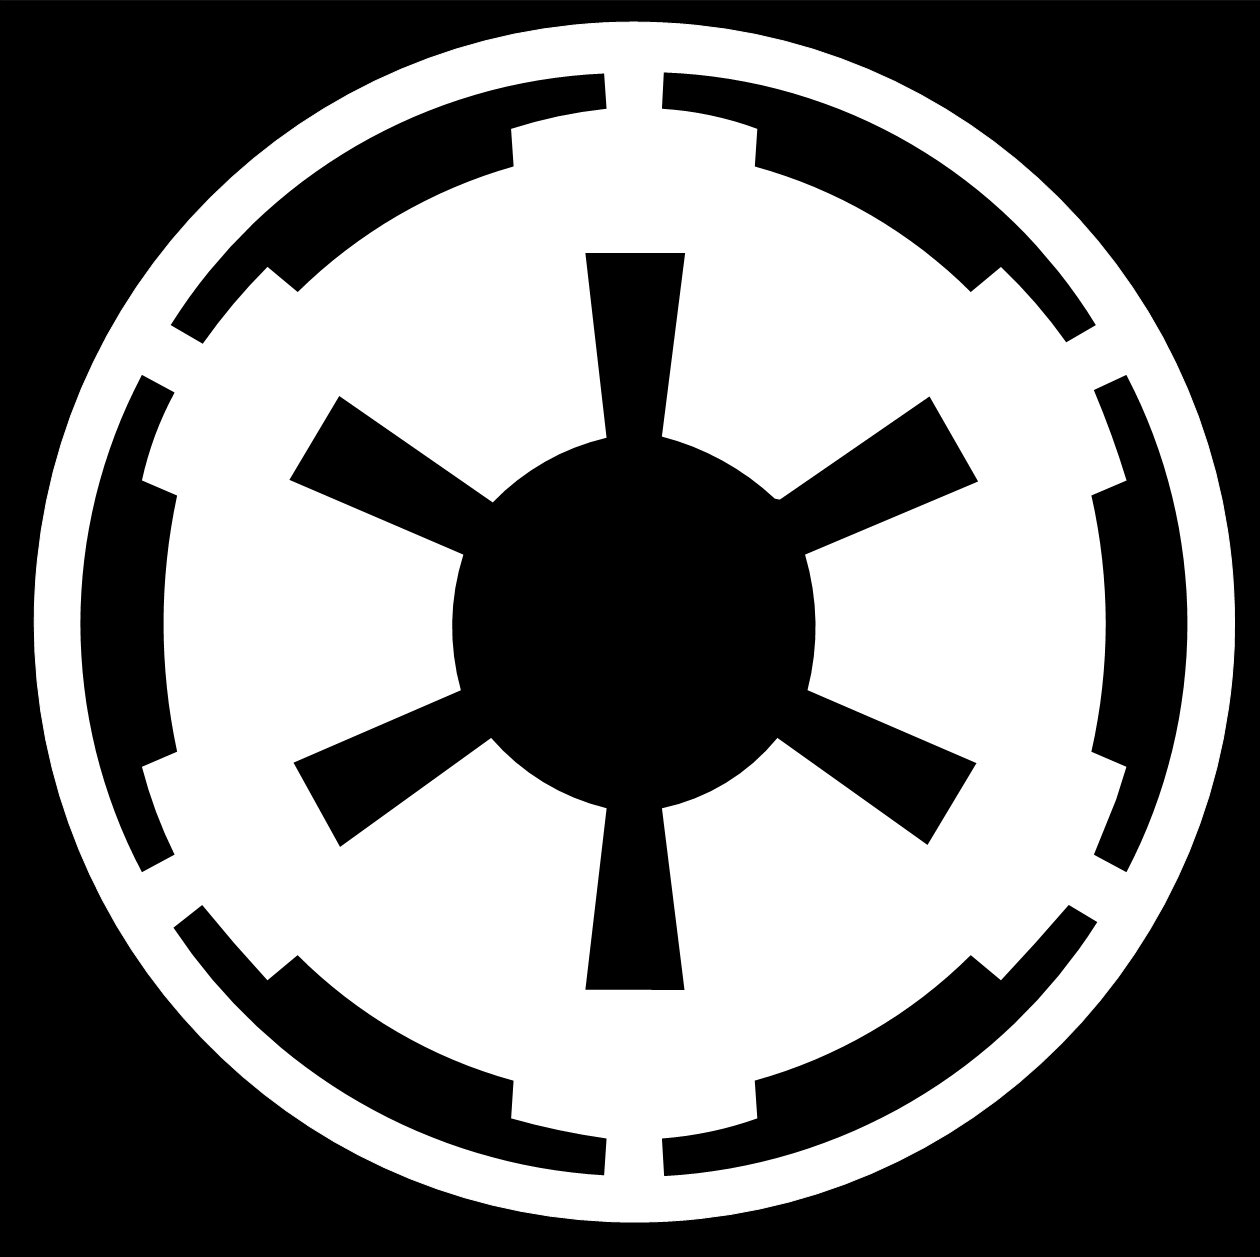 Imperial Symbol Star Wars Free Cliparts That You Can Download To You    